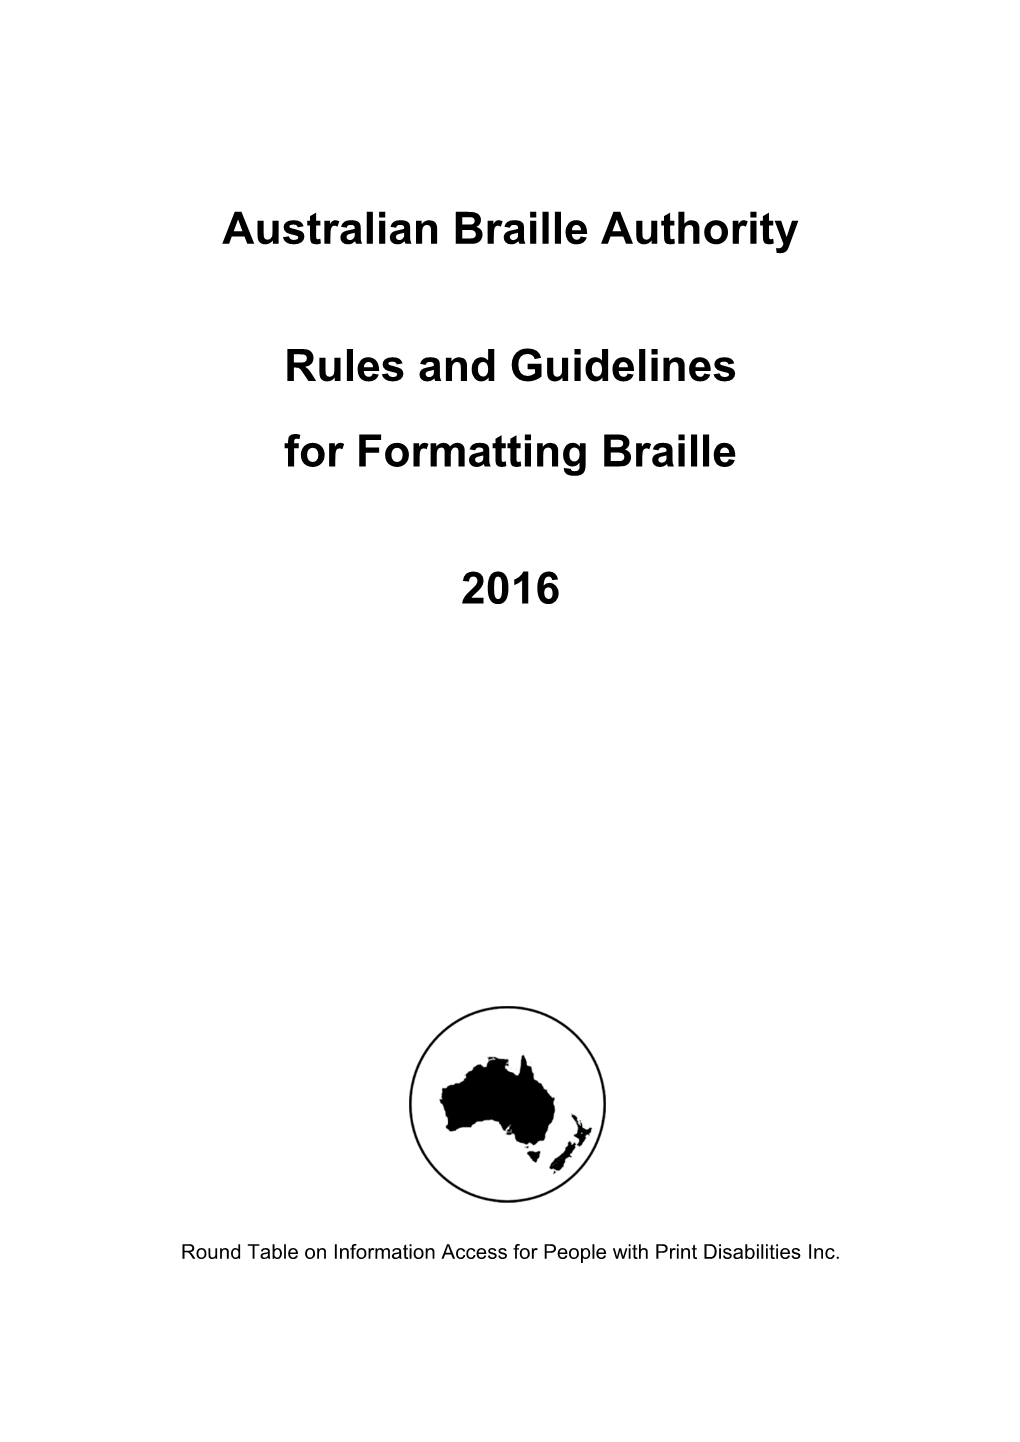 ABA Rules and Guidelines for Formatting Braille